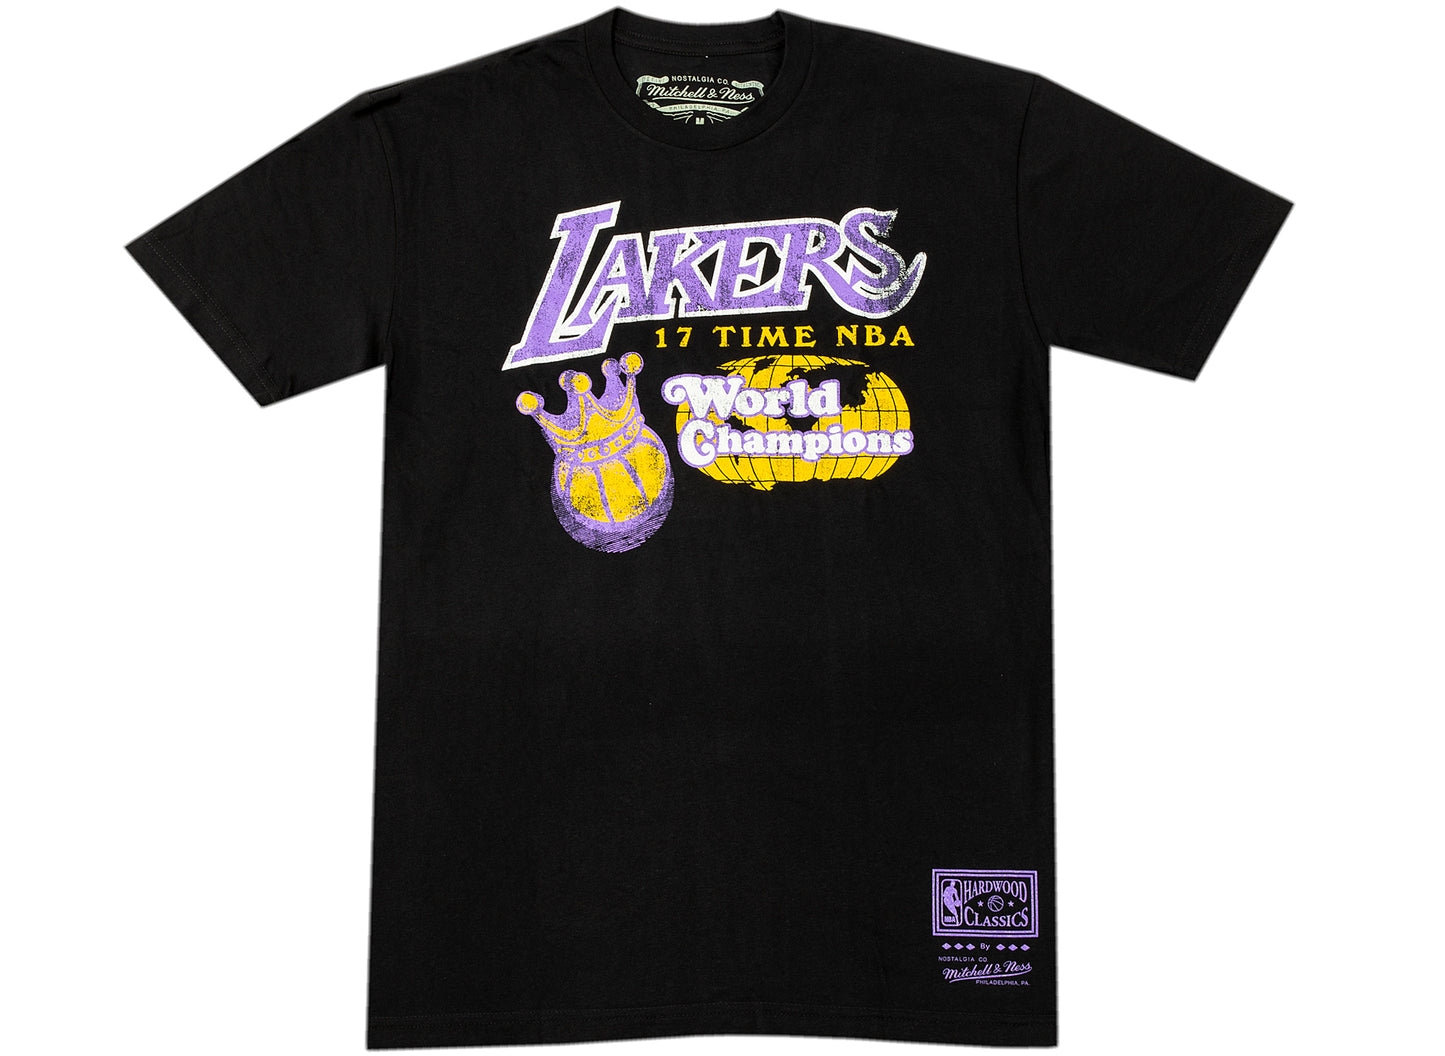 Mitchell Ness NBA 17x Champs Los Angeles Lakers Tee